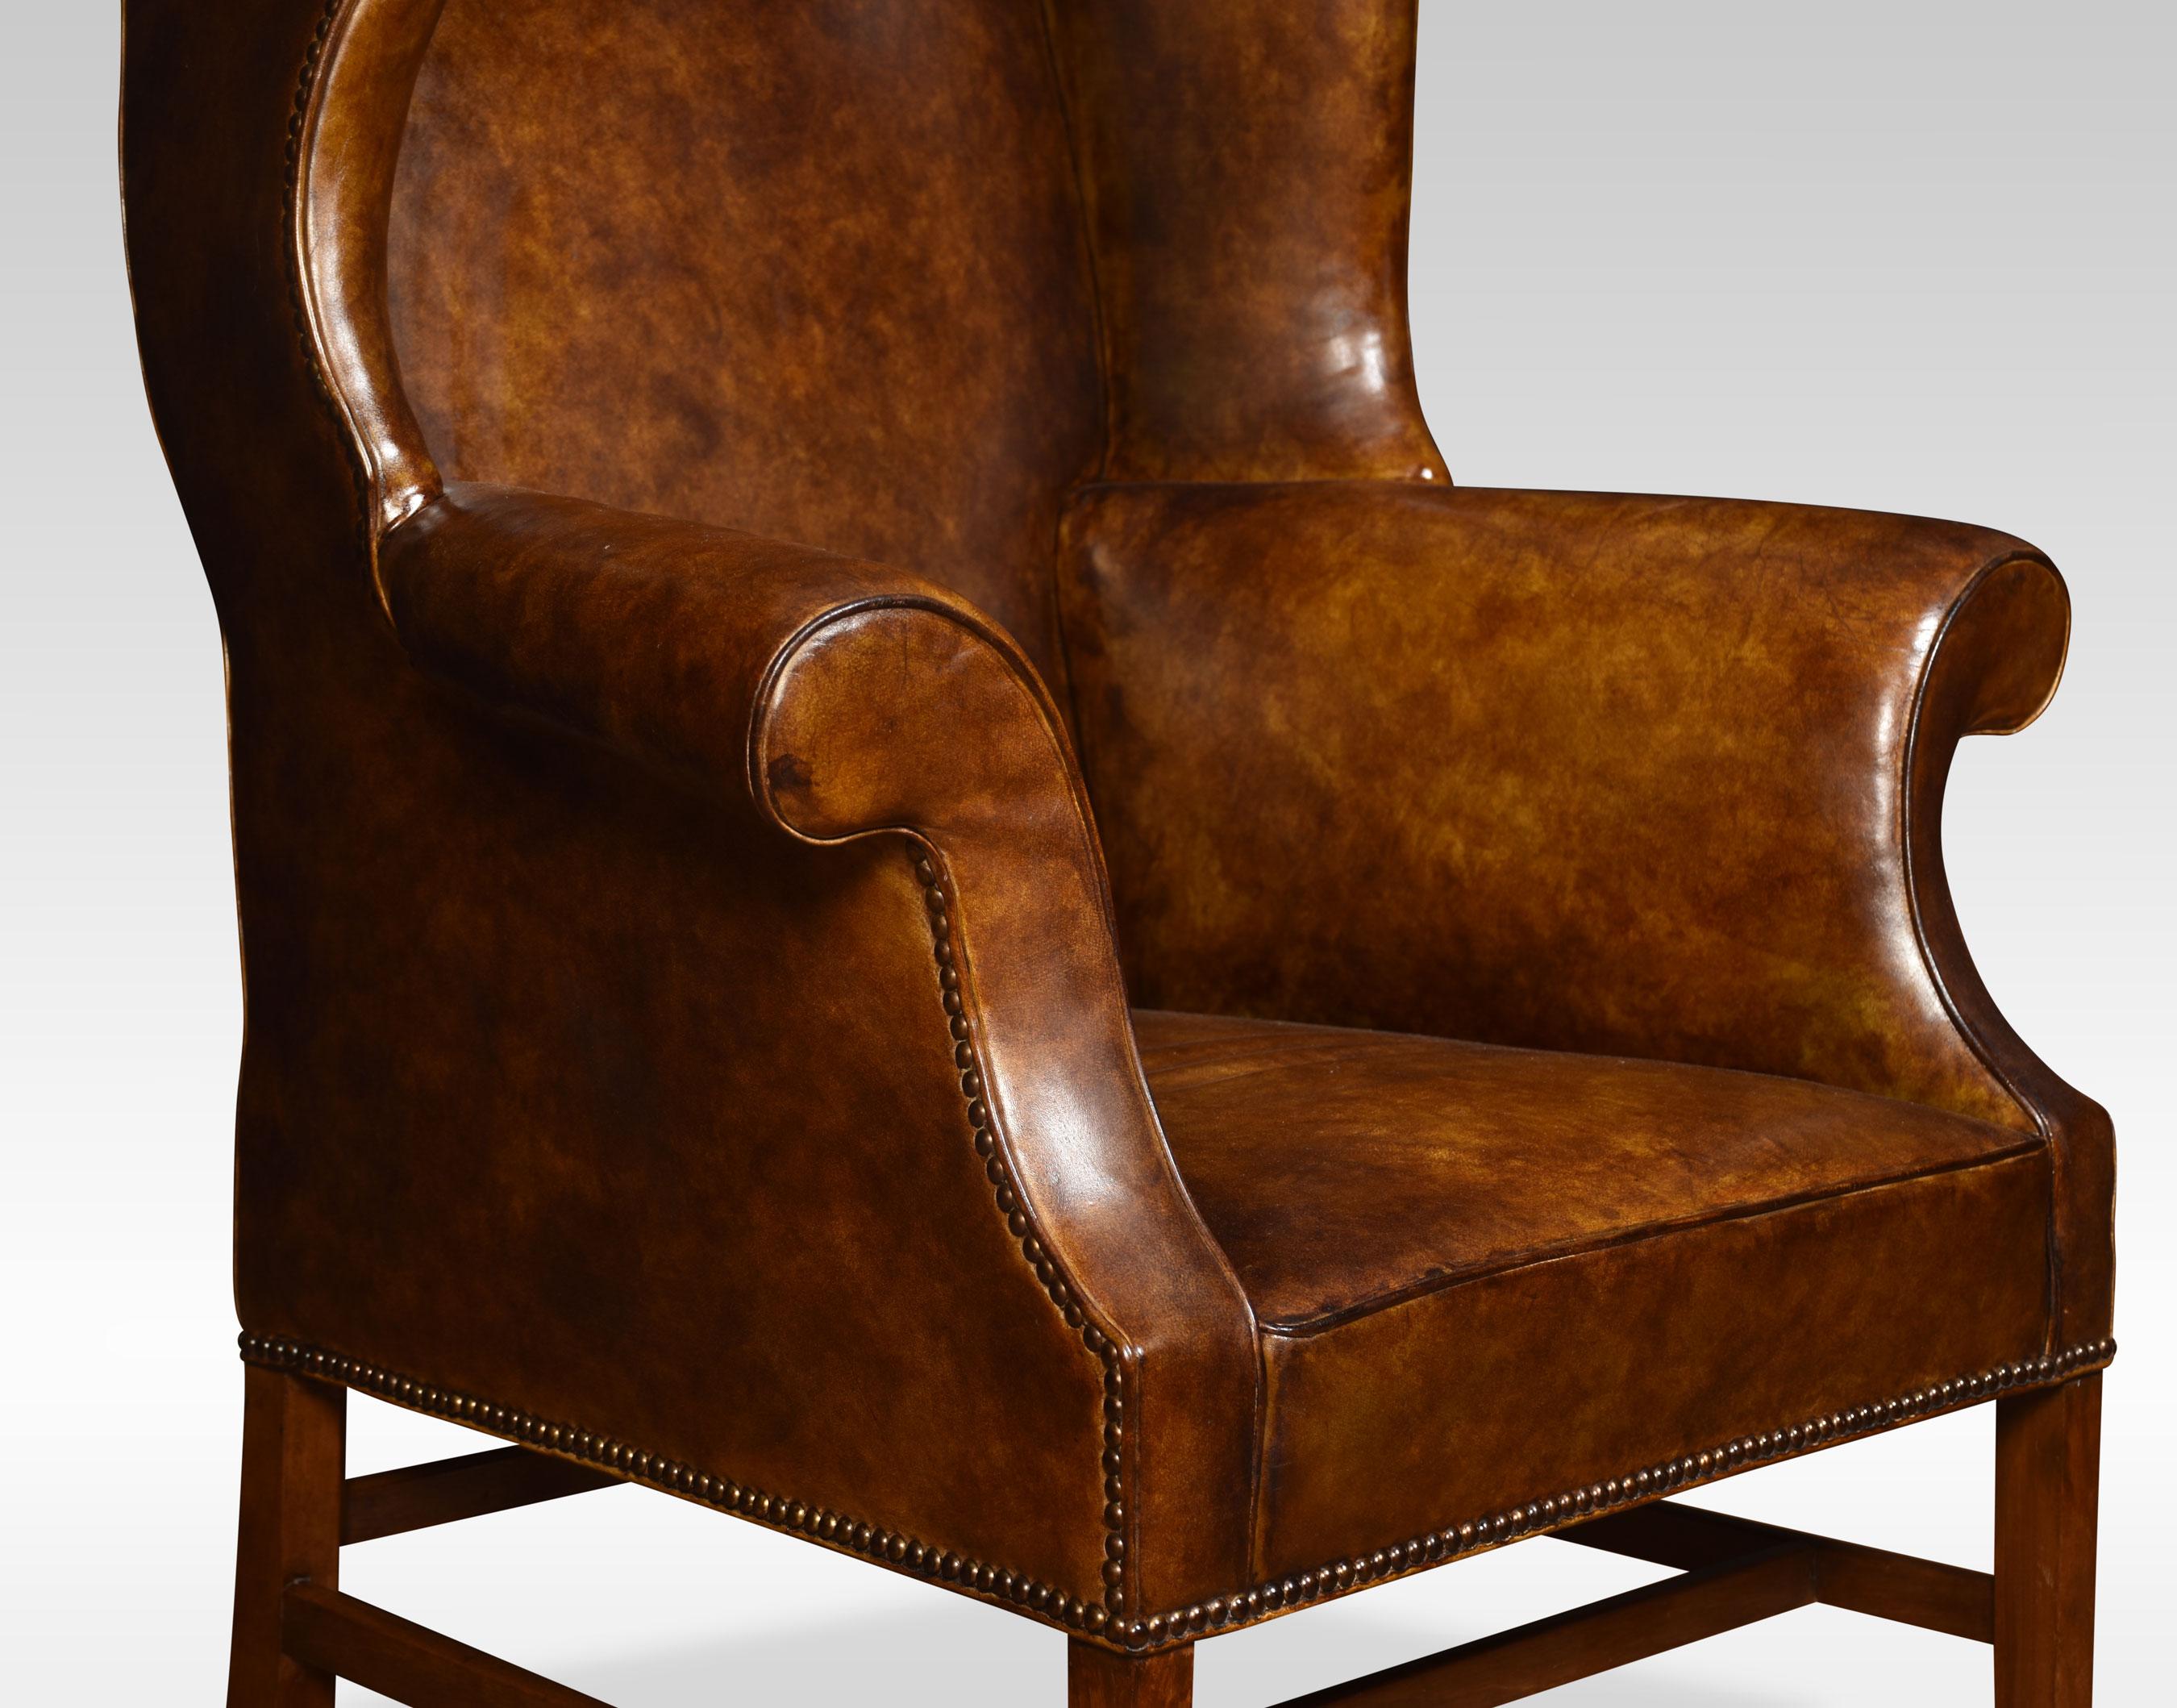 Mahogany framed wing armchair of generous proportions, the shaped top above upholstered back, arms and seat in brown leather, raised up on square supports united by stretchers.
Dimensions
Height 47.5 Inches height to seat 17.5 Inches
Width 35.5